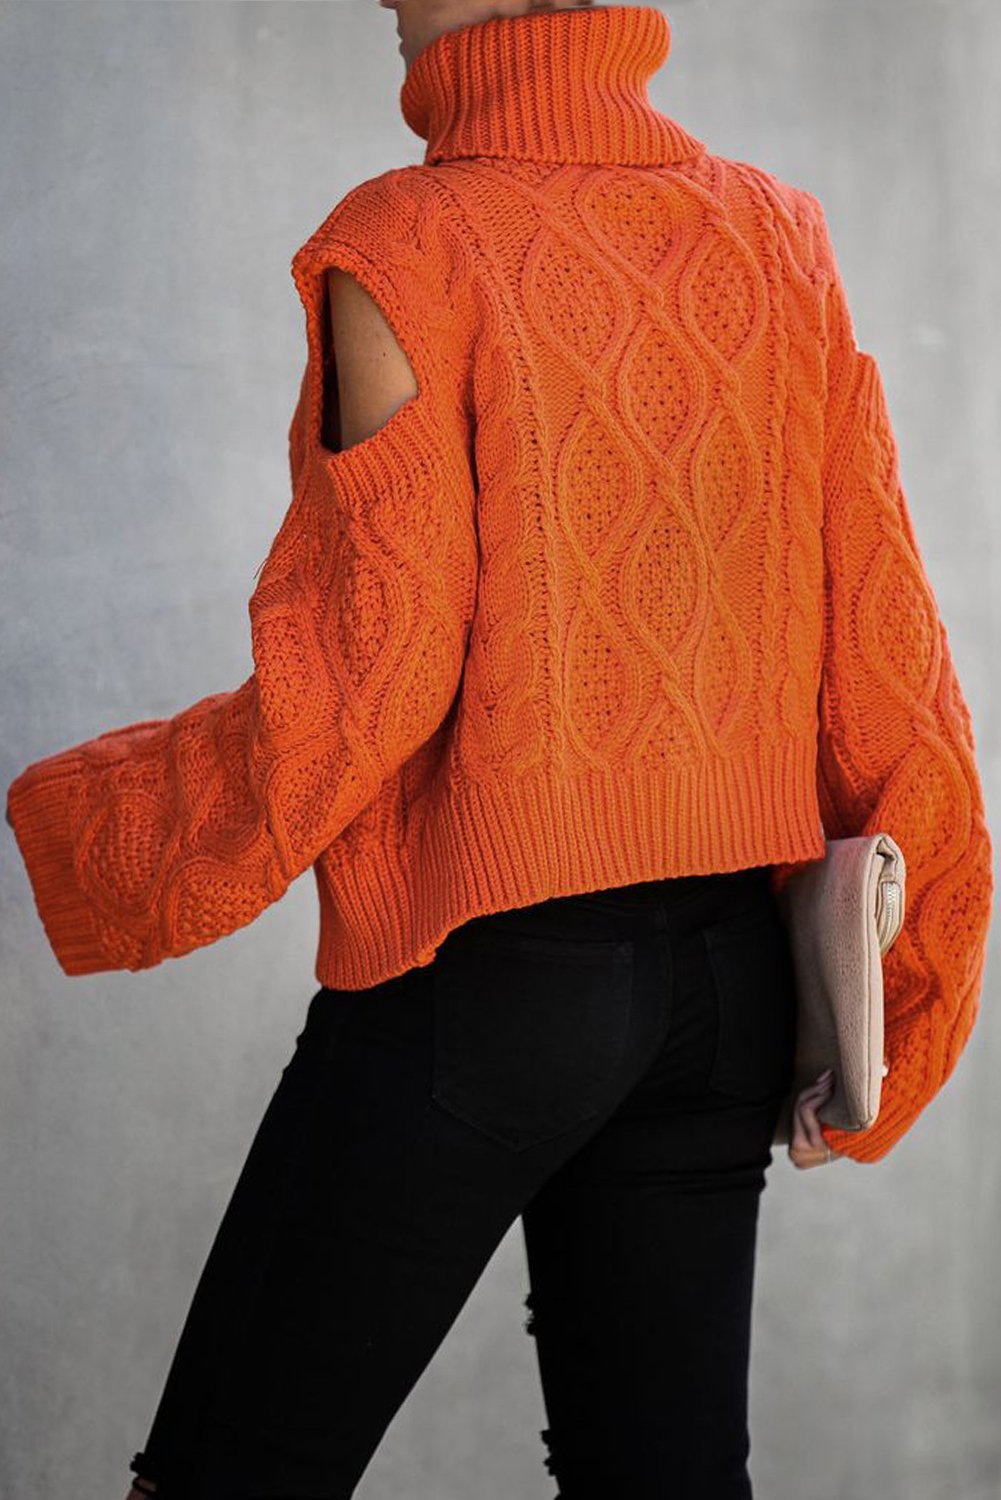 Pull Femme Col Roule Hiver Orange Texture Froide Epaule 